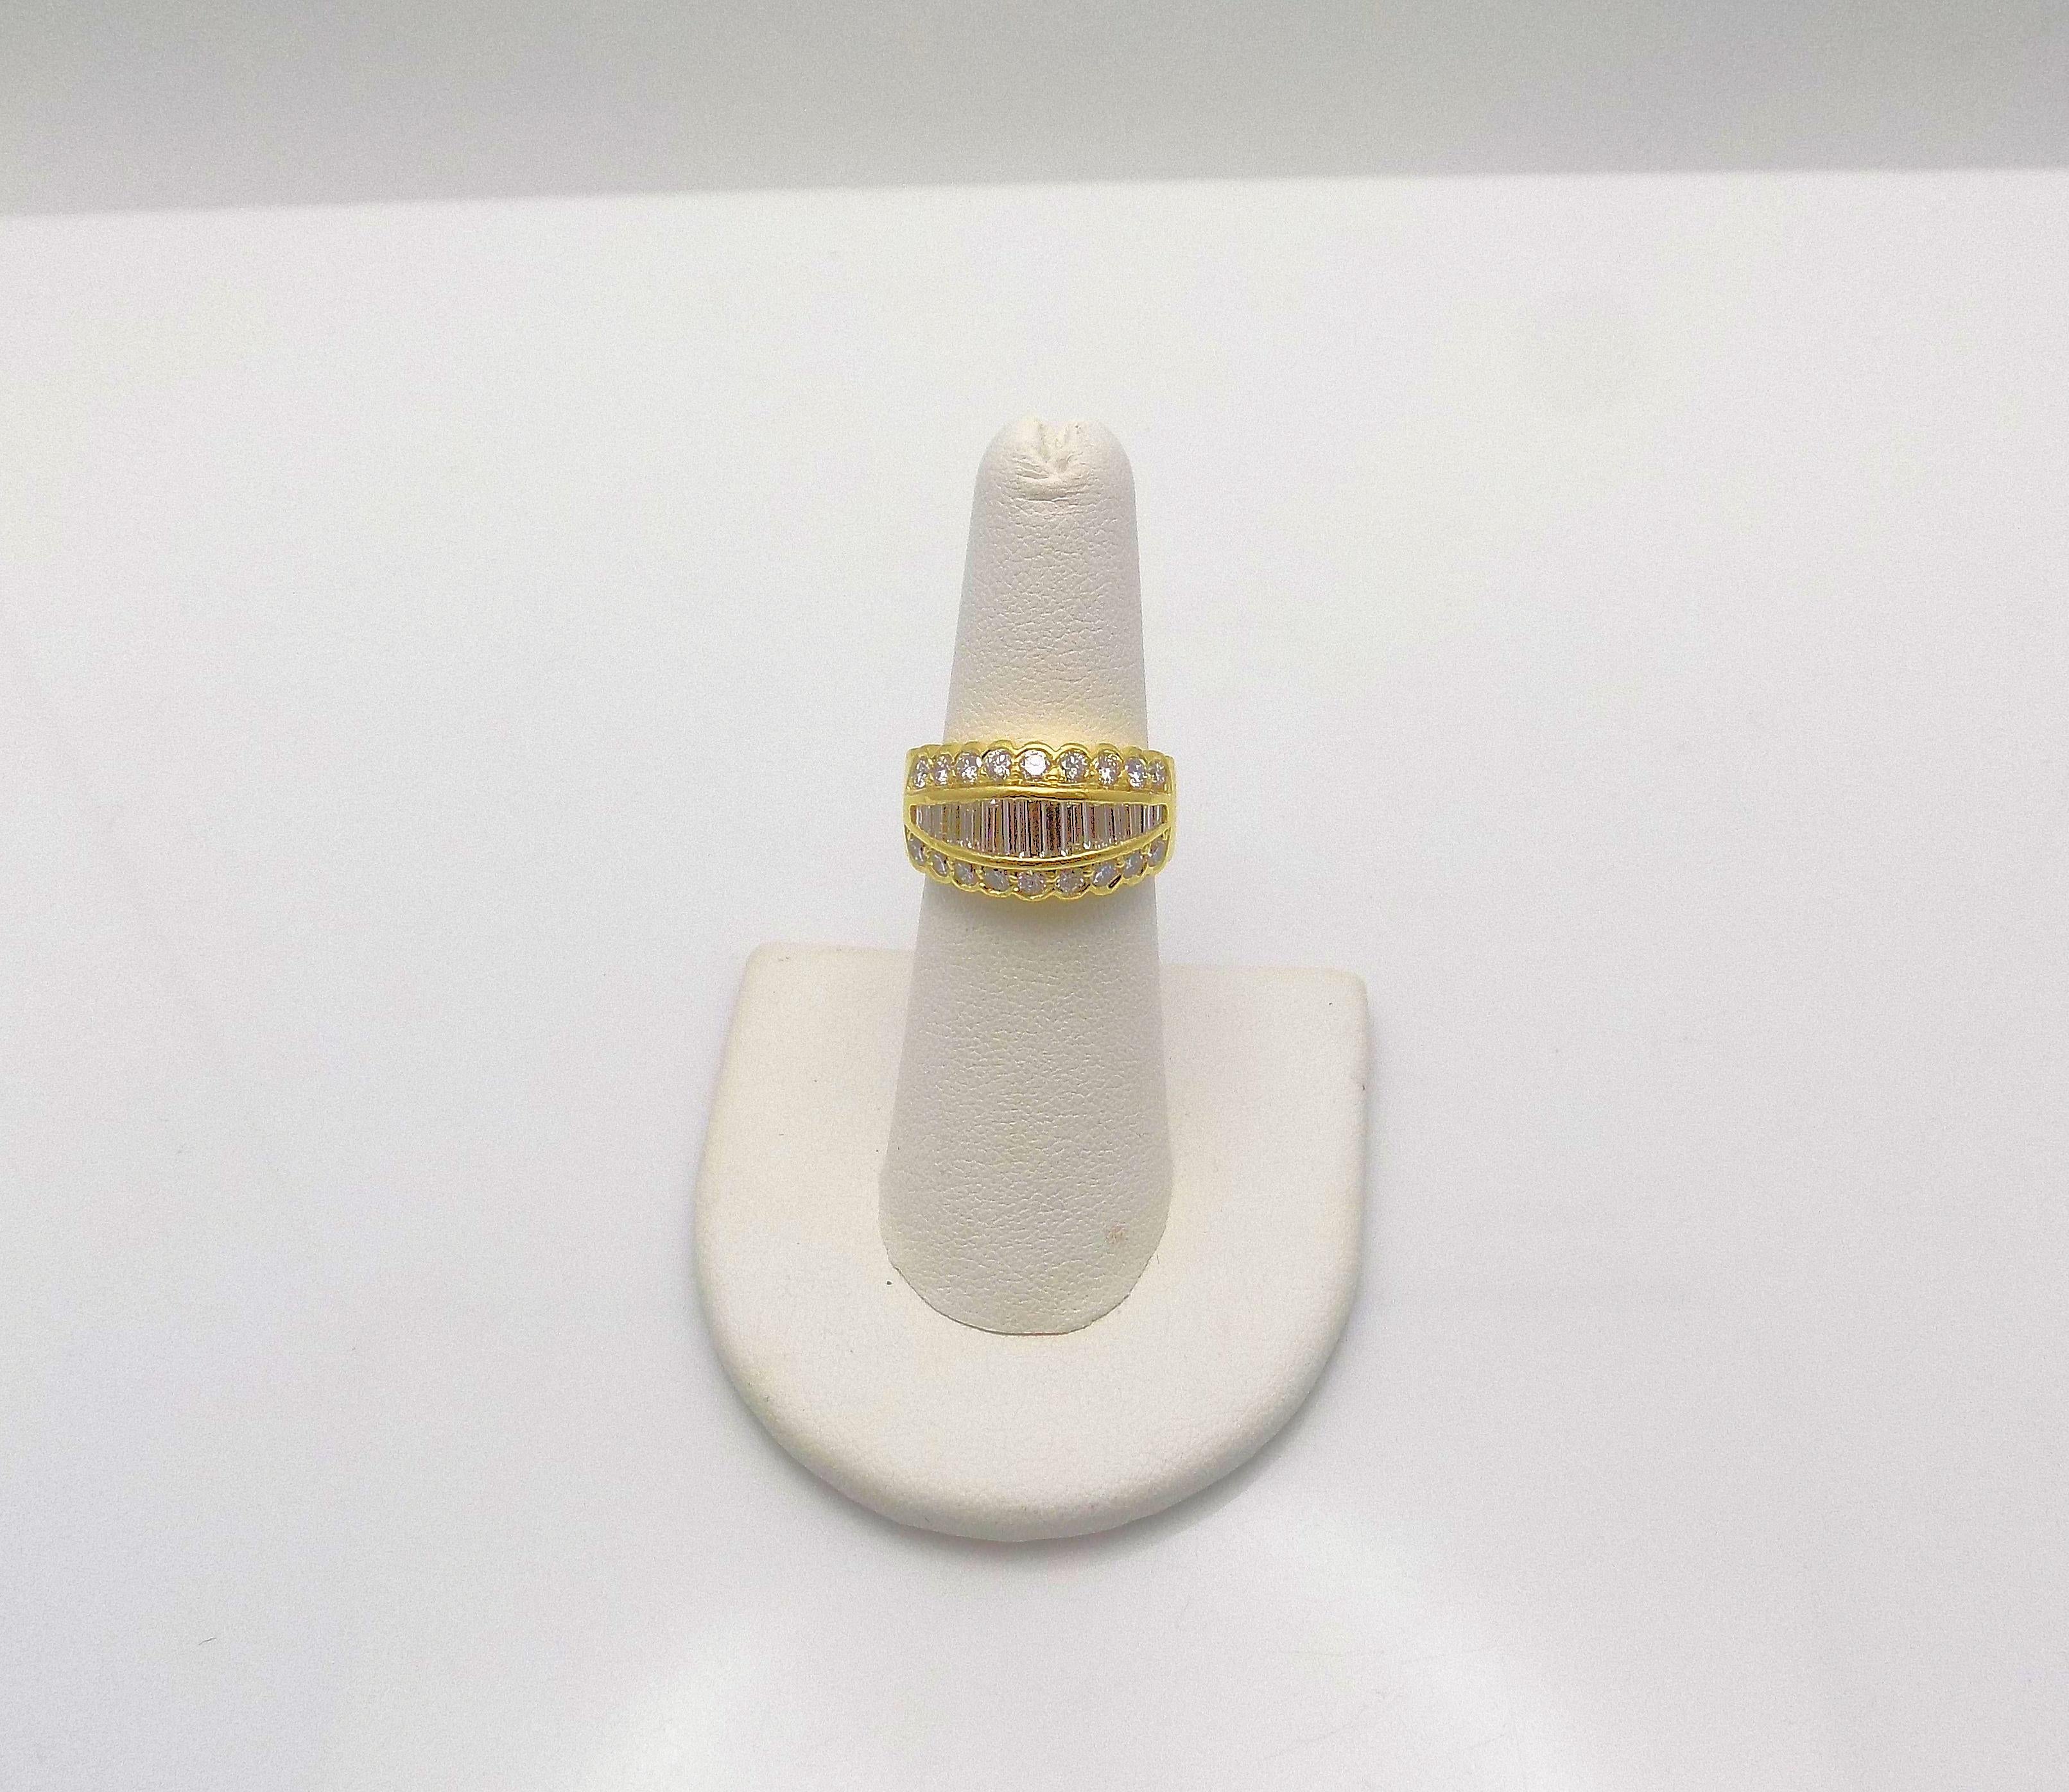 Dazzling 18 Karat Yellow Gold Tapered Band 11.6 X 4 MM featuring 15 Baguettes and 18 Round Brilliant Diamonds 1.25 Carat Total Weight, VS-SI, G-H; Finger Size 6; Signed: JB Star (Jewels By Star) 6.6 DWT or 10.26 Grams.